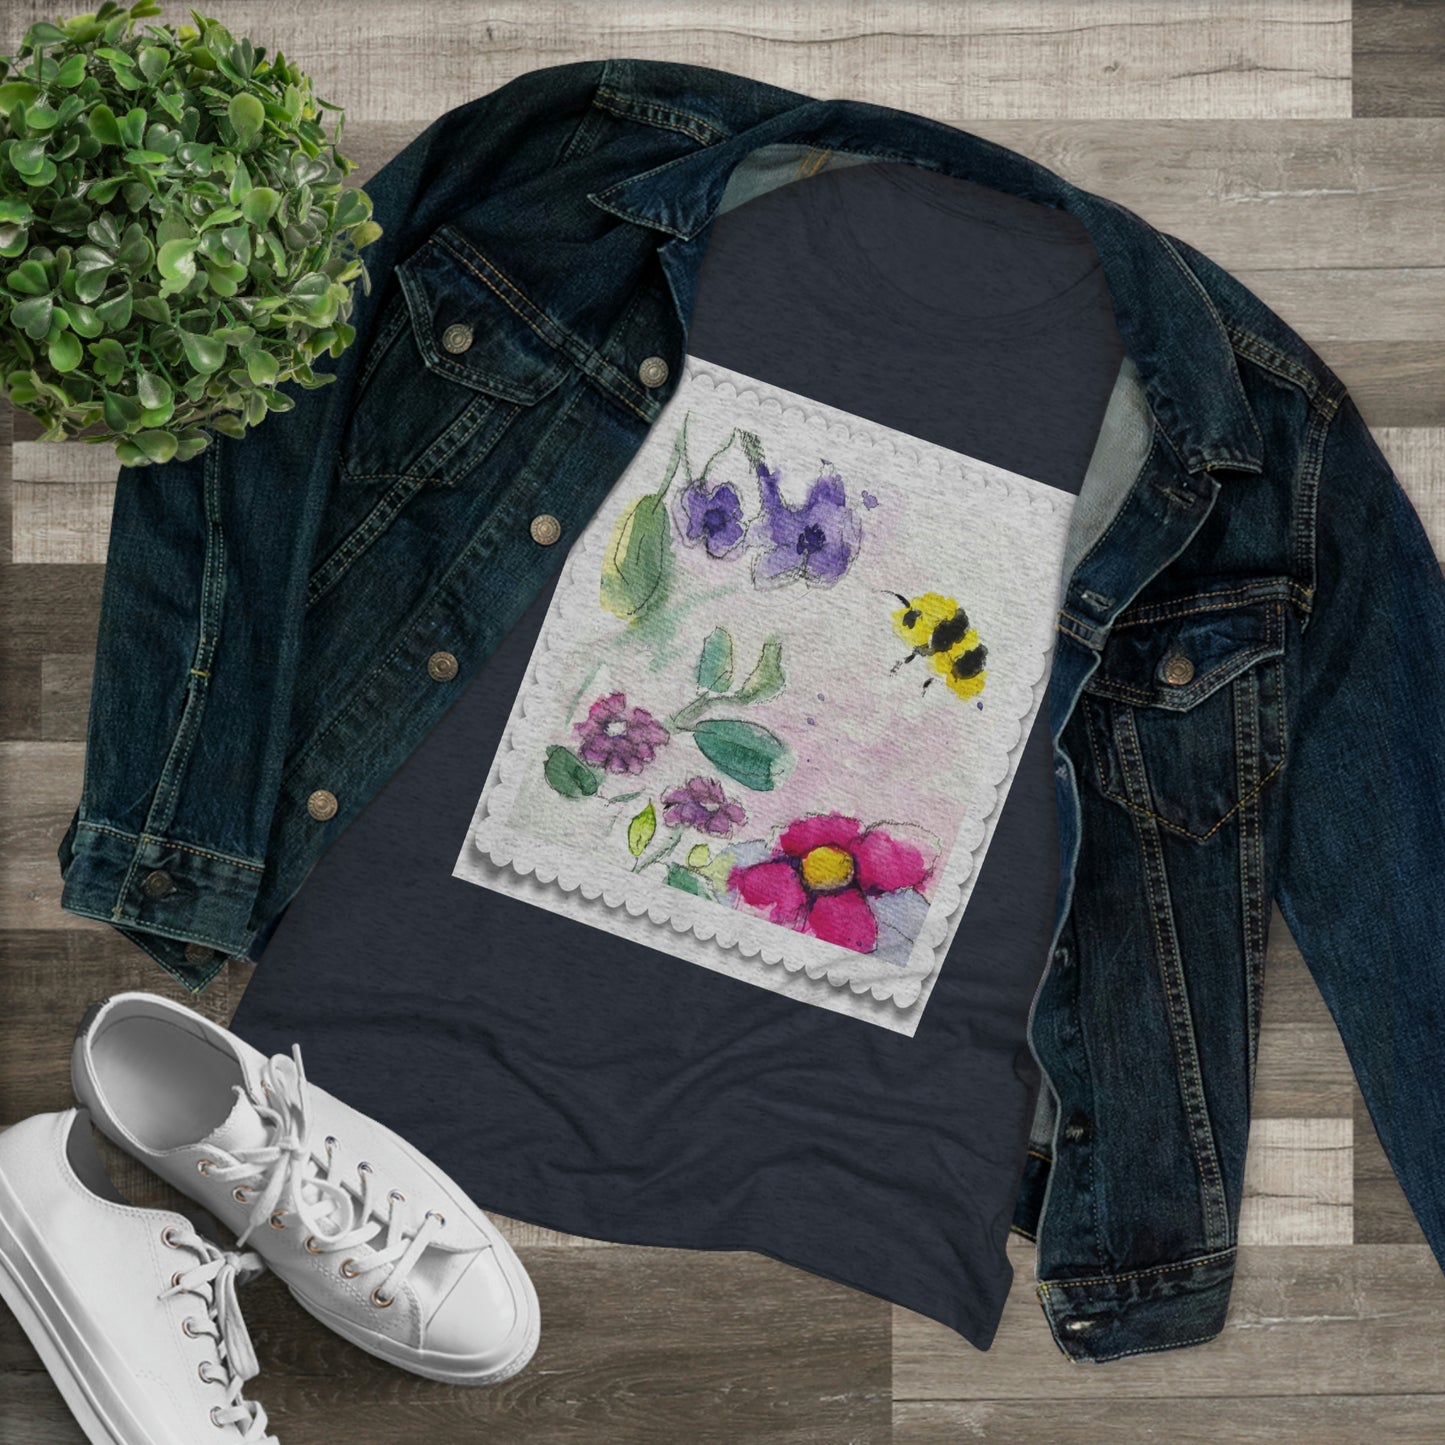 Bumble Bee in the Garden Women's fitted Triblend Tee  tee shirt